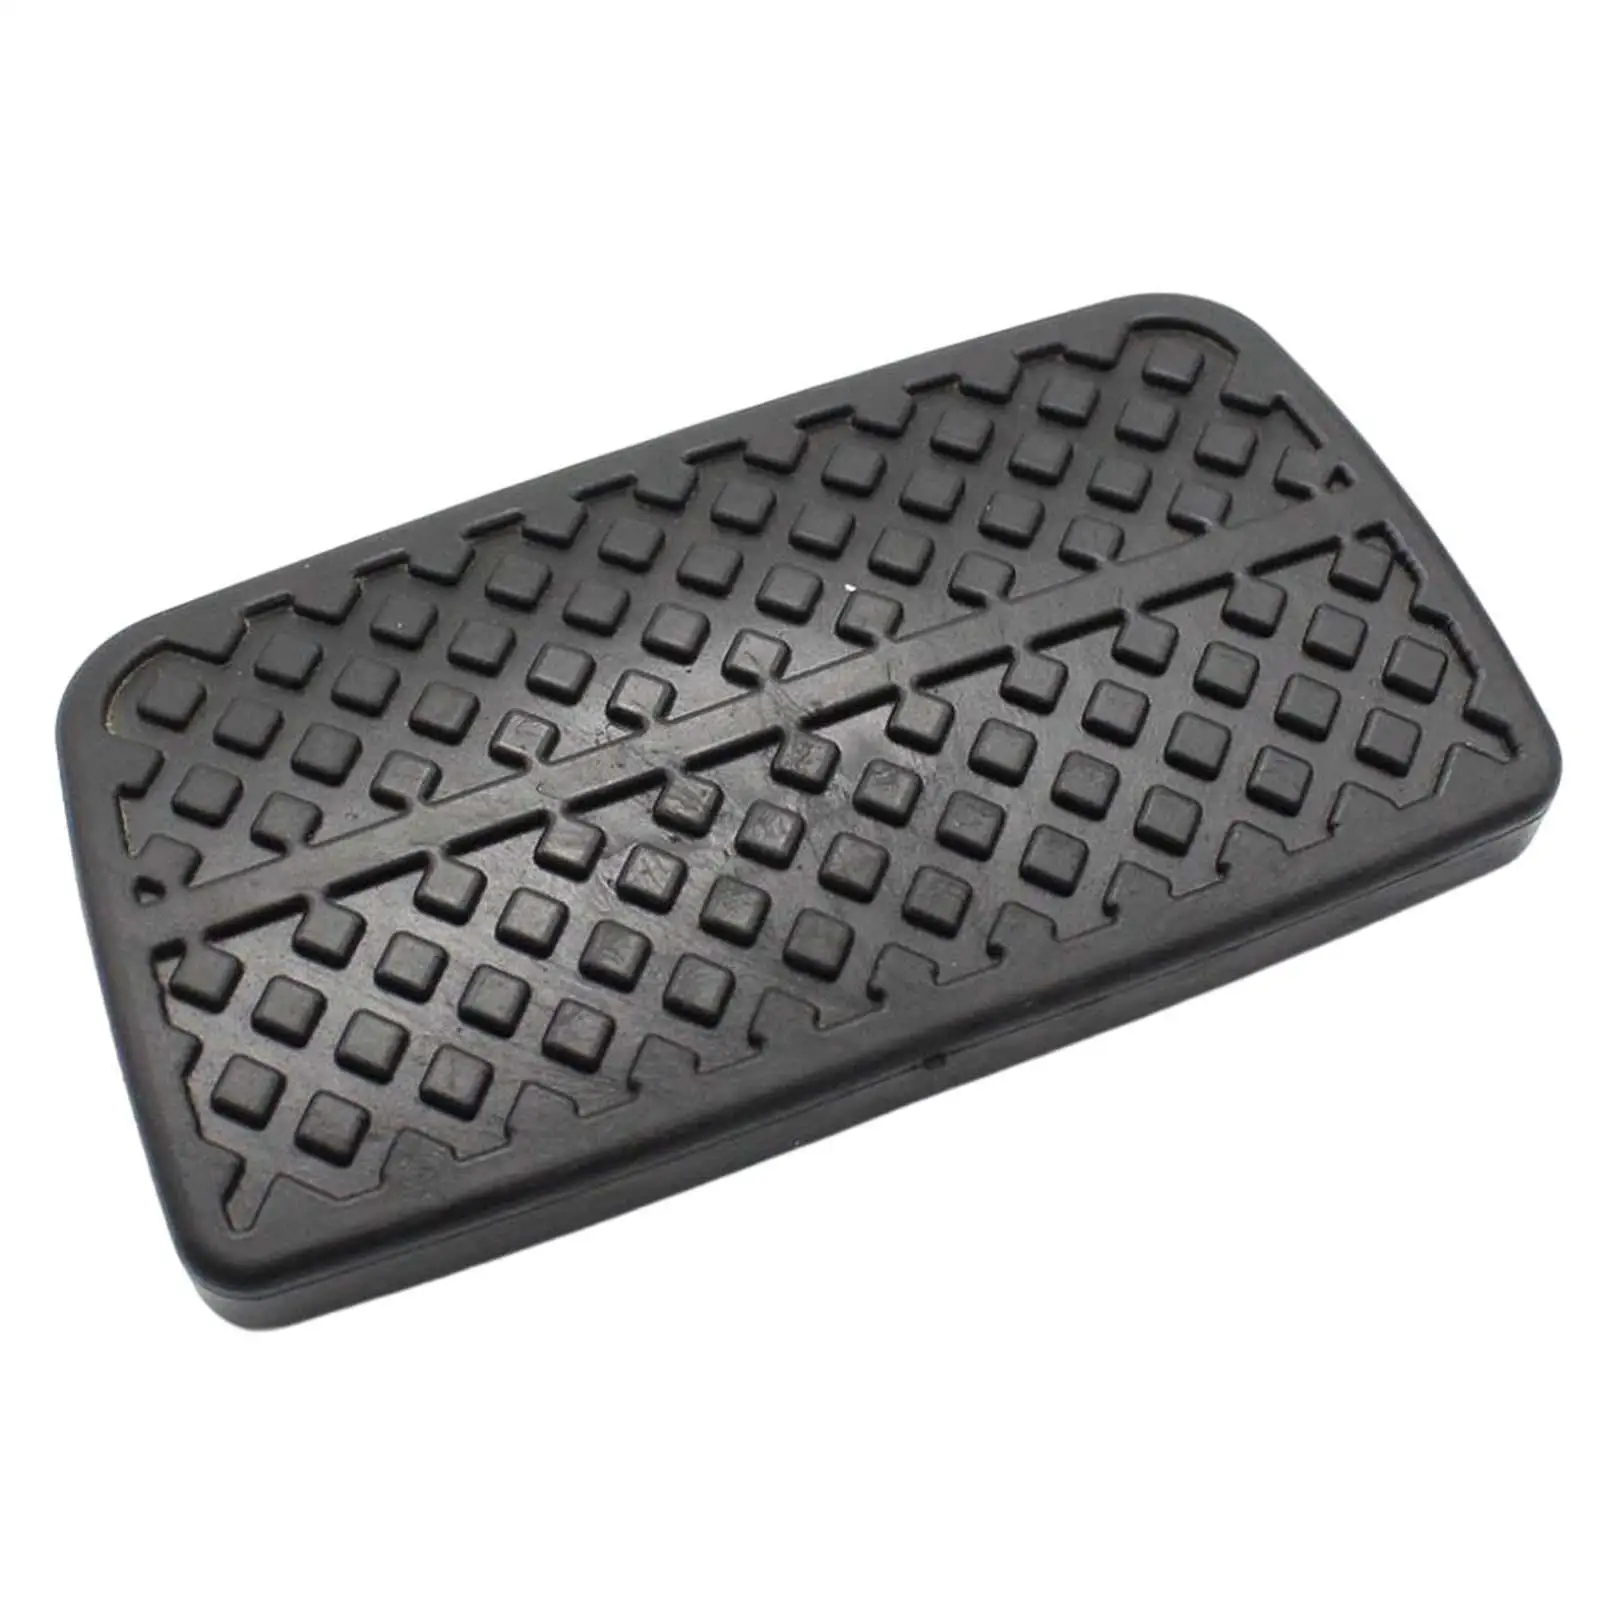 Car Rubber Brake Pedal Cover 46545-s1F-981 replacements for Honda Insight 2010-2014 Sturdy Vehicle Spare Parts Comfortable